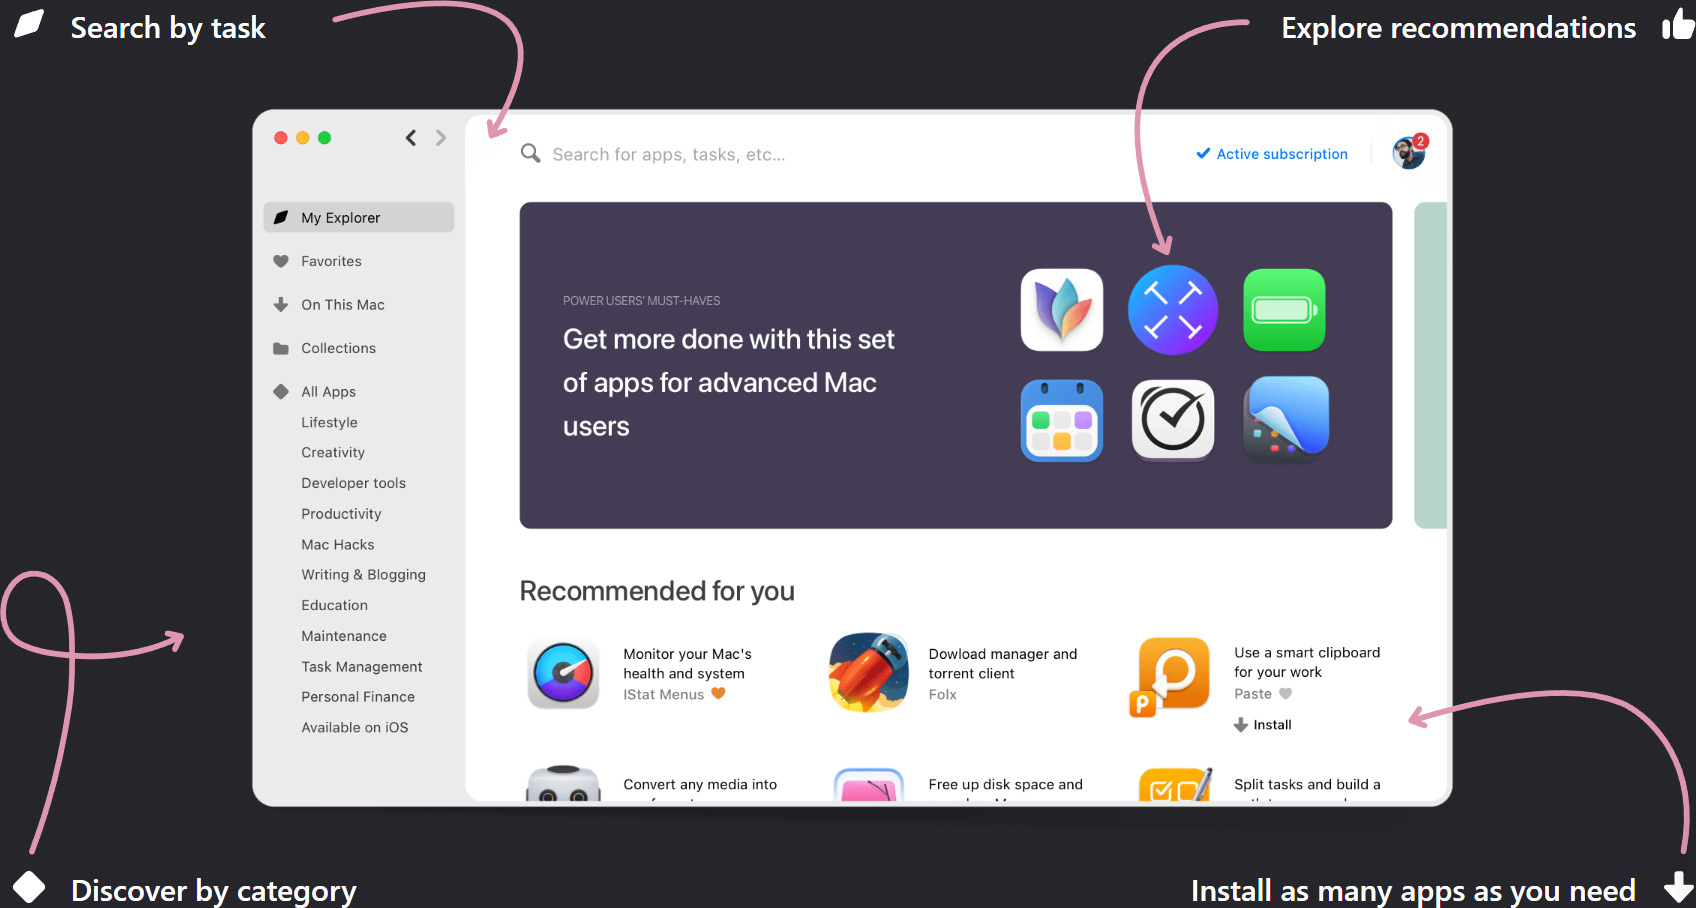 Search by task | Explore recommendations | Discover by Category | Install as many apps as your need